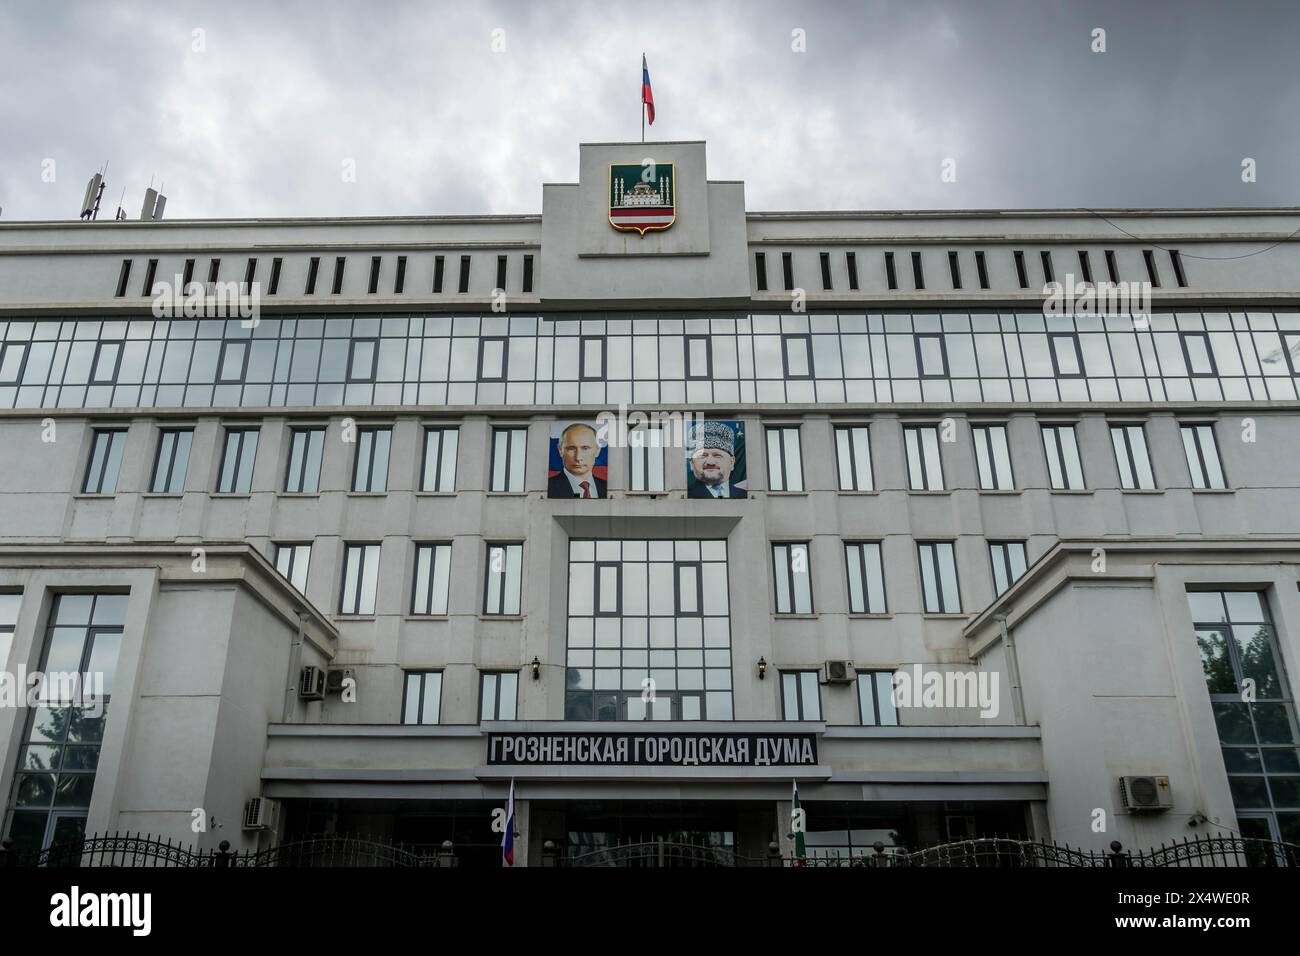 The city administration in Grozny, Republic of Chechnya, with the flag and coat of arms, and portraits of Vladimir Putin and Akhmad-Khadzhi Kadyrov. Stock Photo